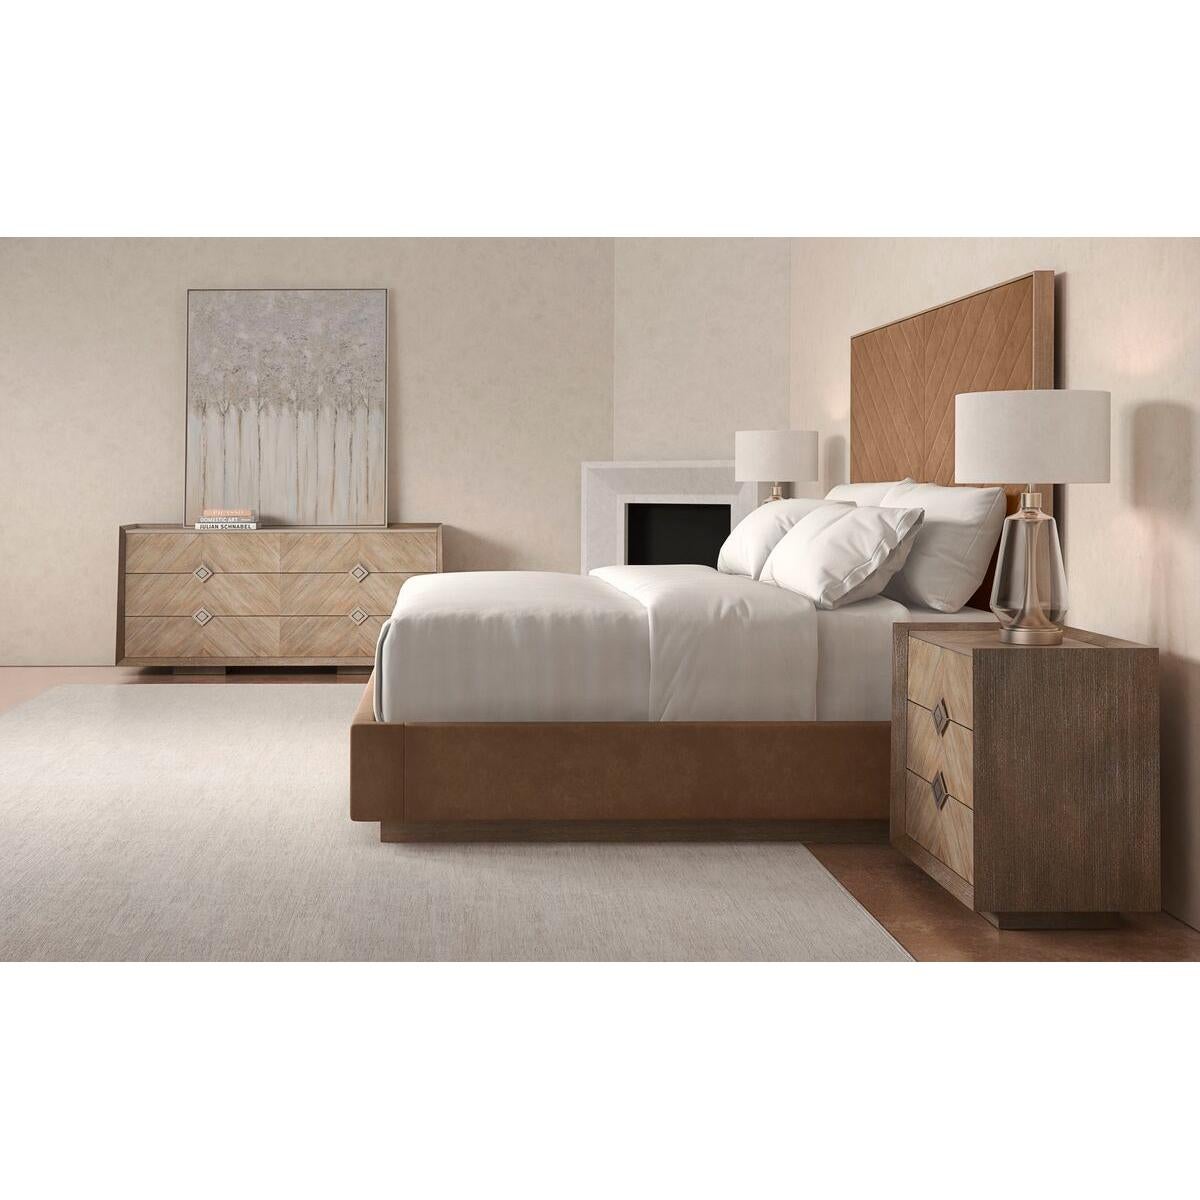 Upholstered king bed with an Ash Driftwood finish frame. It has a tall upholstered headboard with a modern channel tufting design of converging angles that meet in the center to create a mesmerizing chevron. This bed’s fully finished sides appear to